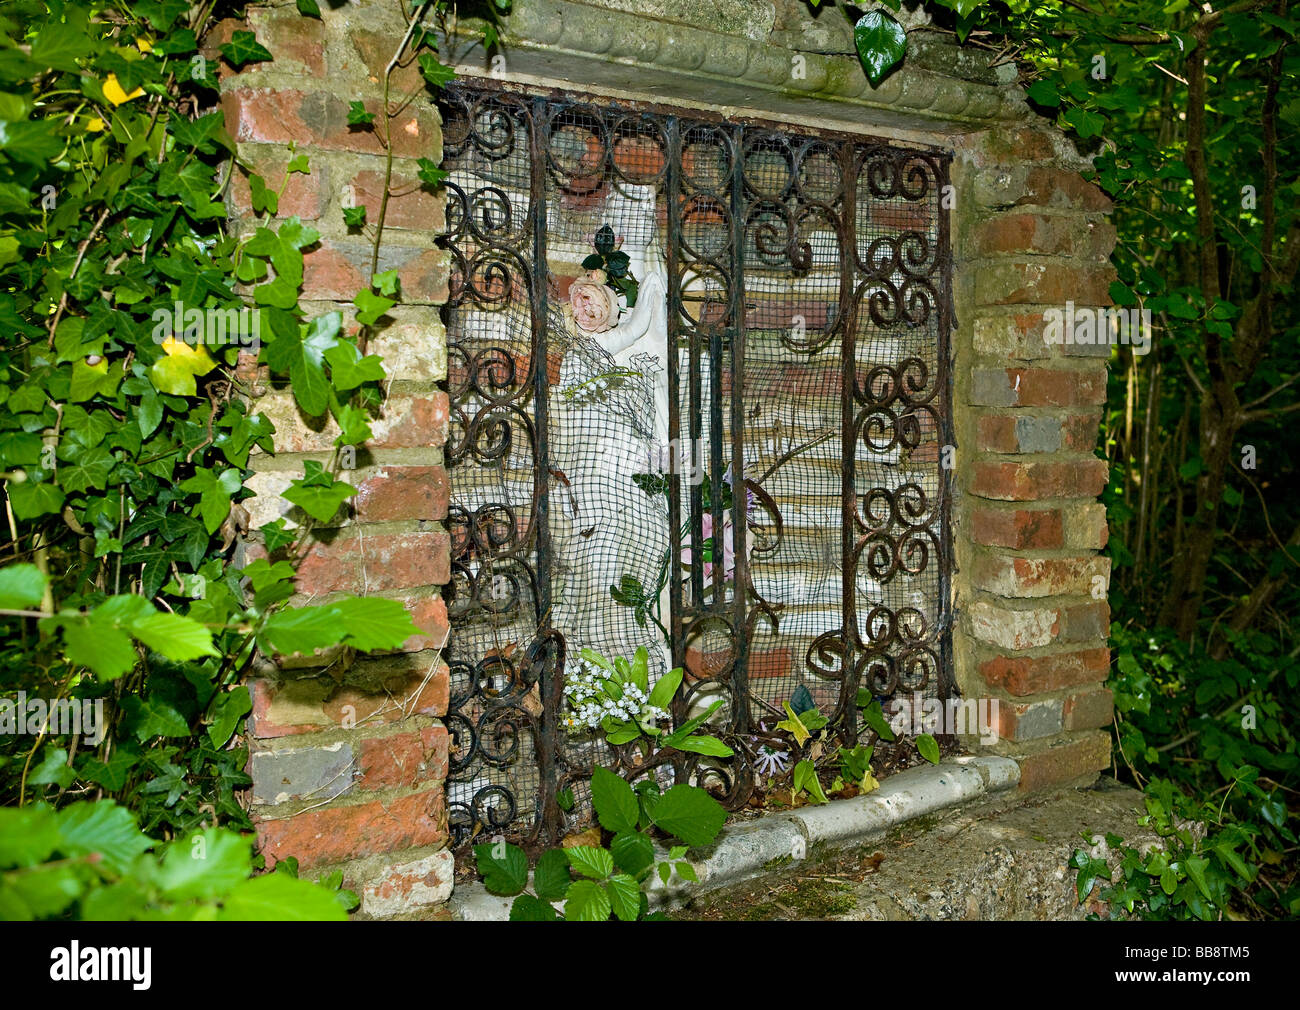 The Madonna Shrine (allegedly haunted), Binsted Woods, West Sussex, UK Stock Photo